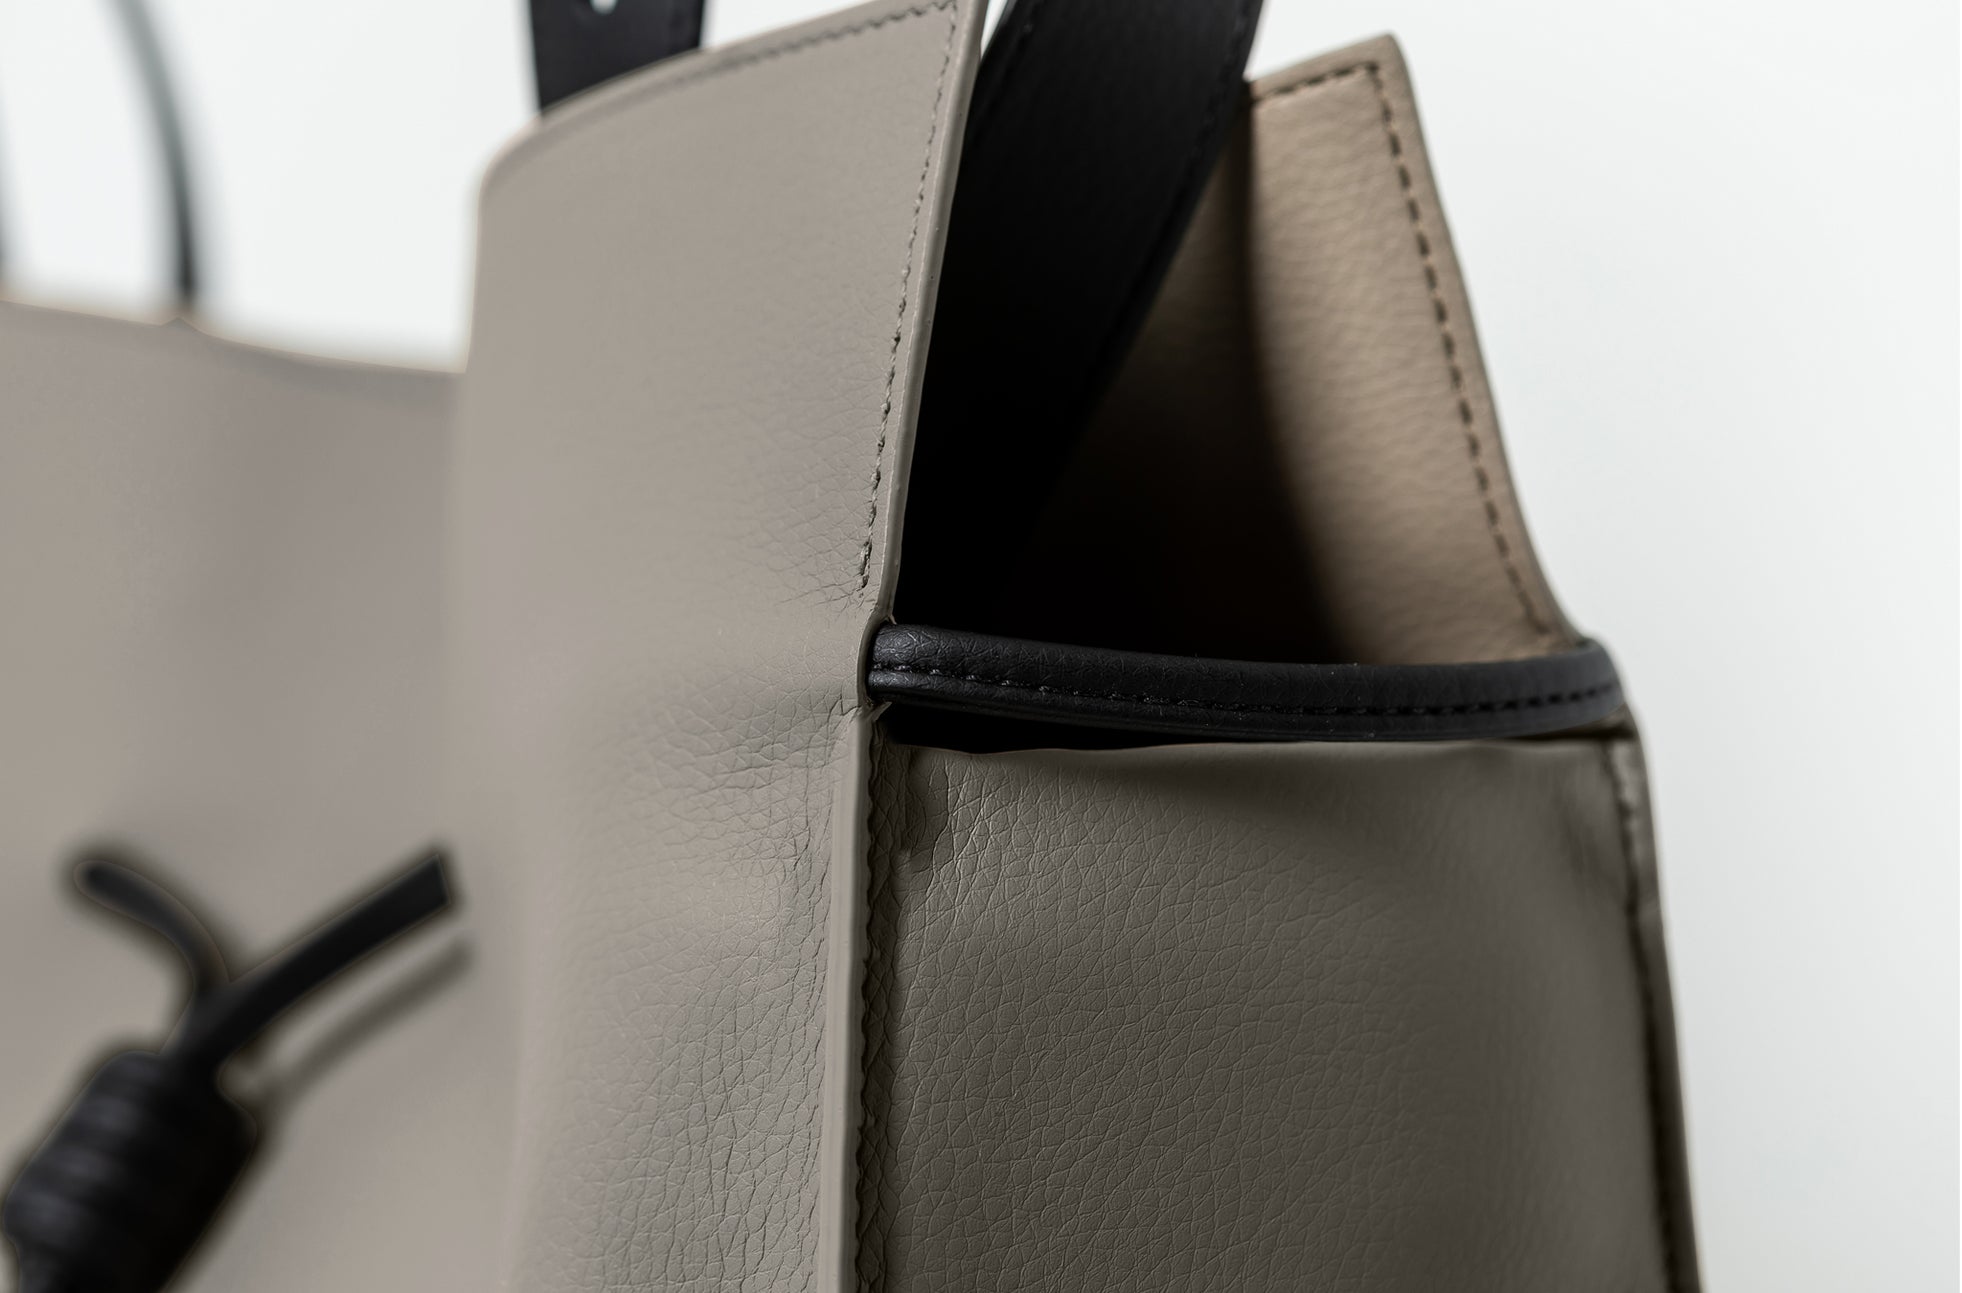 The Medium Shopper in Technik-Leather in Stone and Black image 6